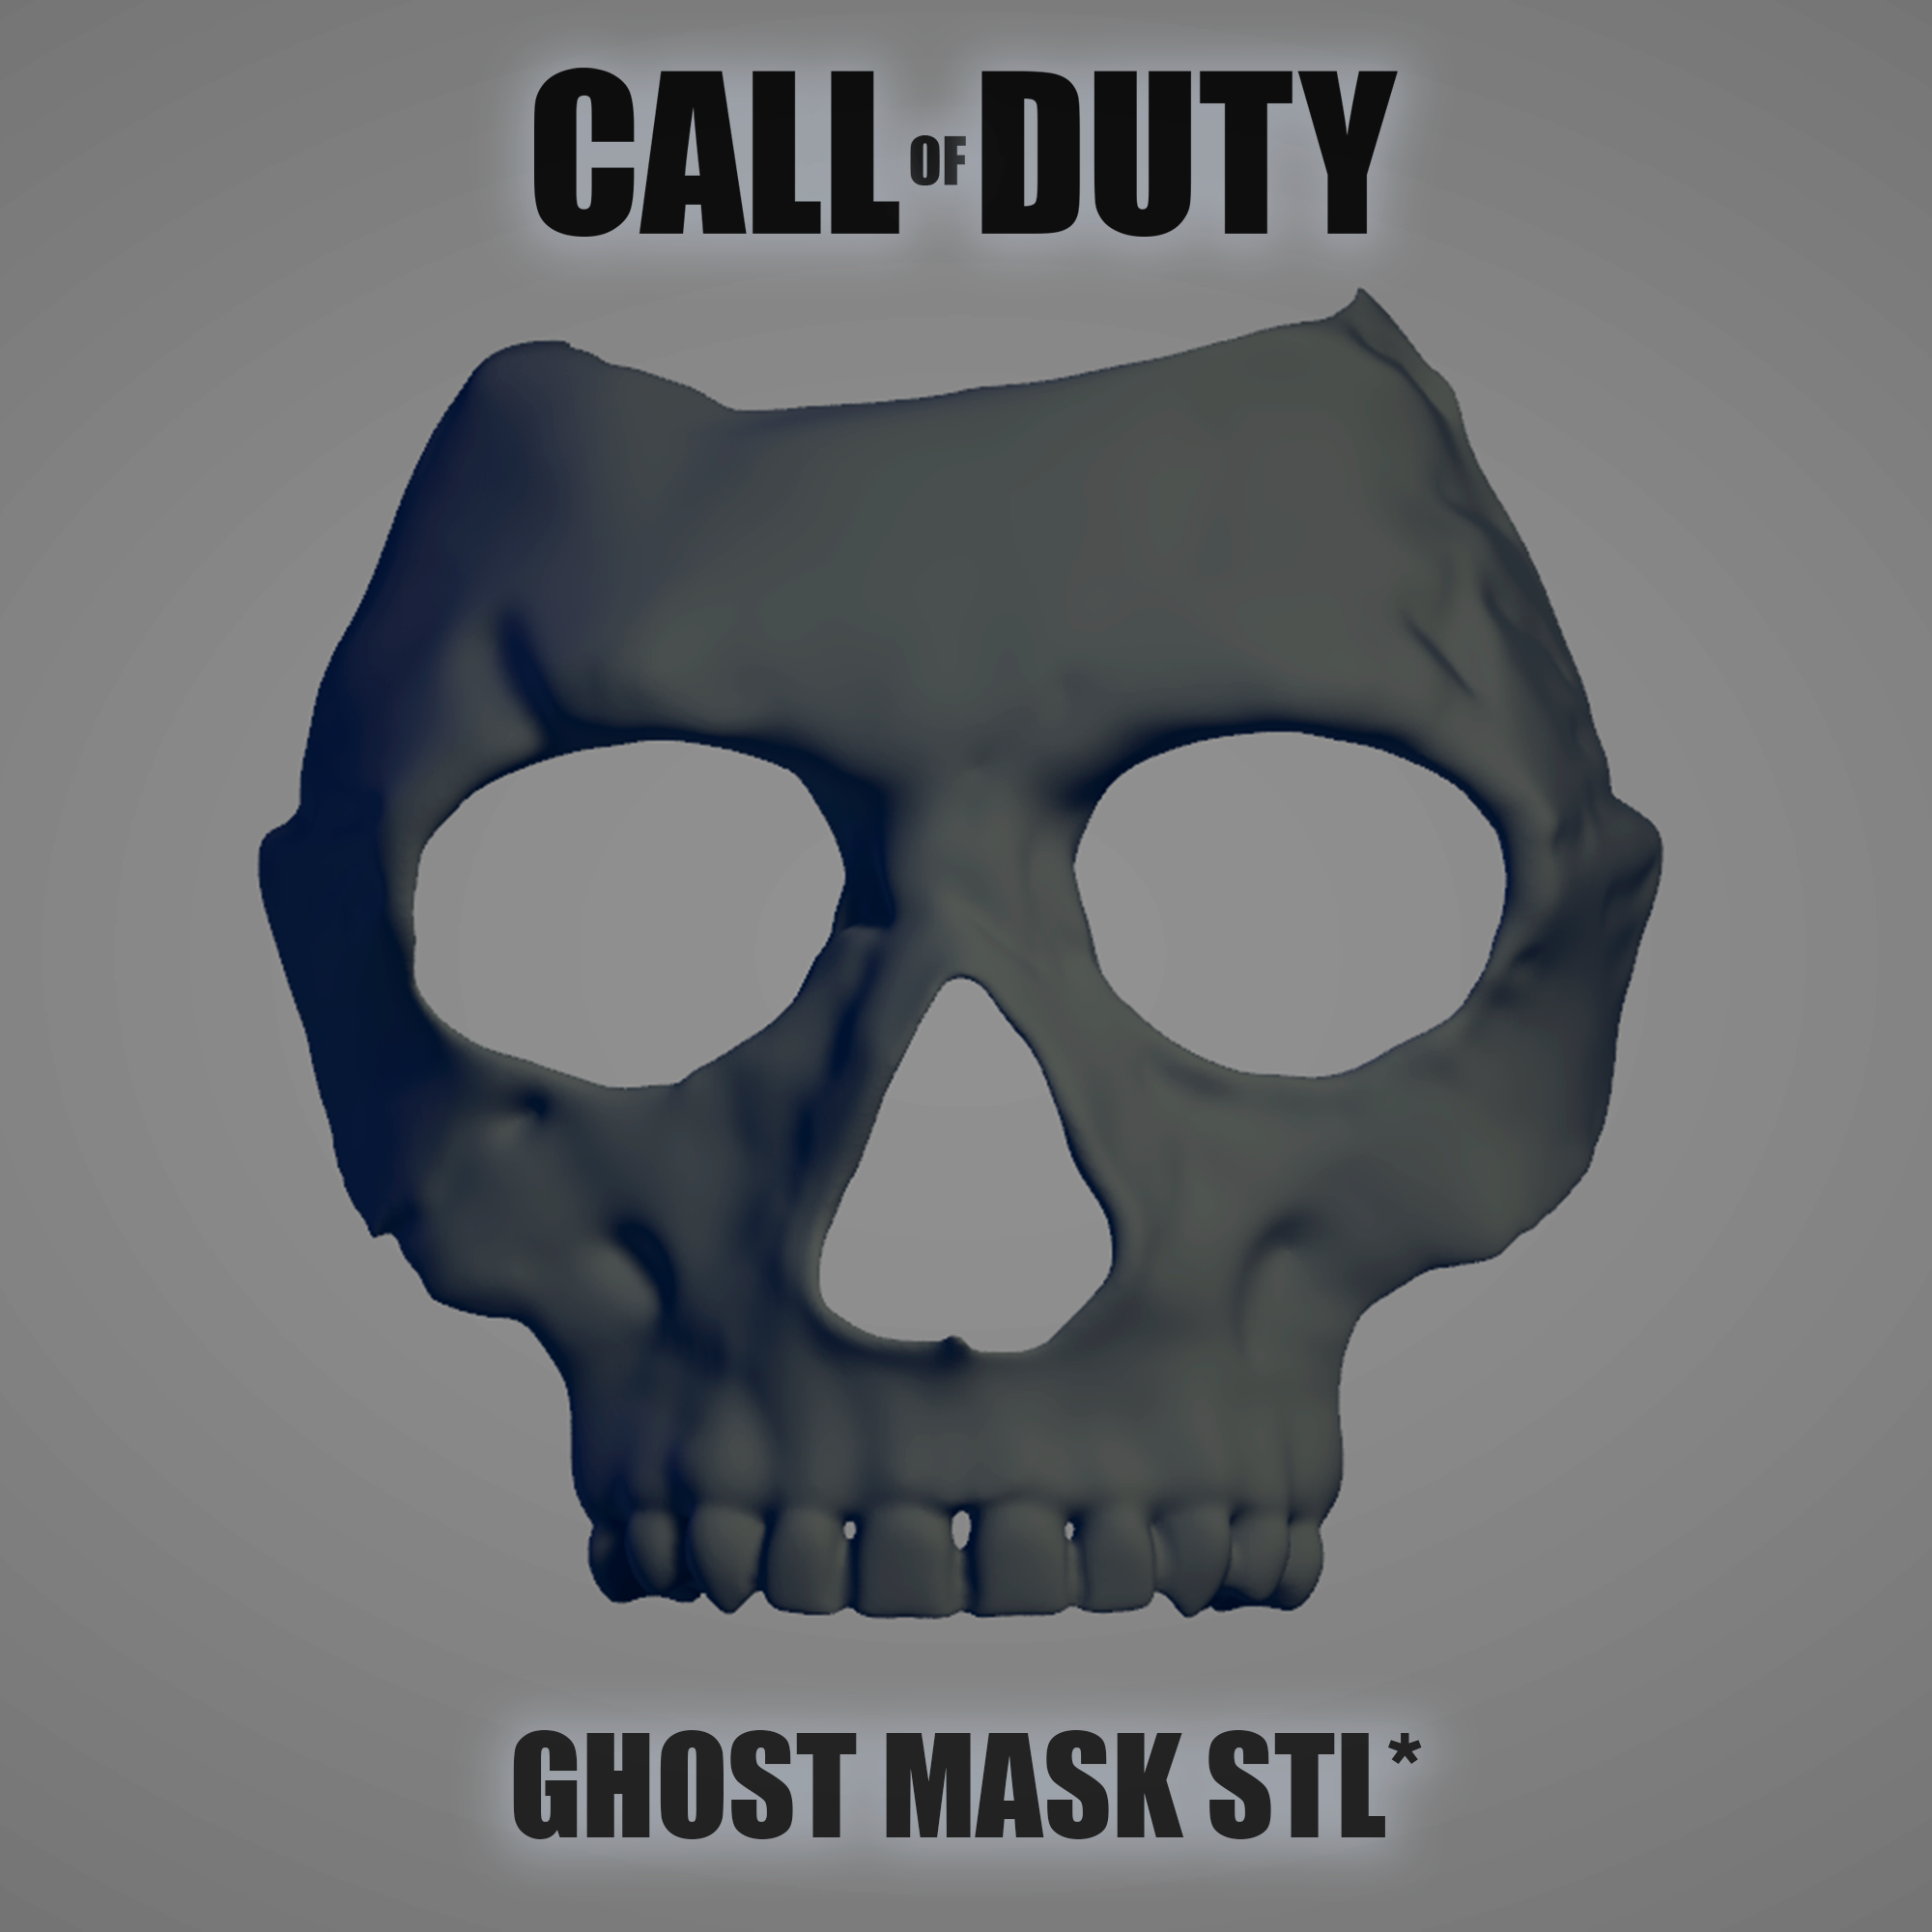 This is what Ghost's face looks like without his mask in MW2